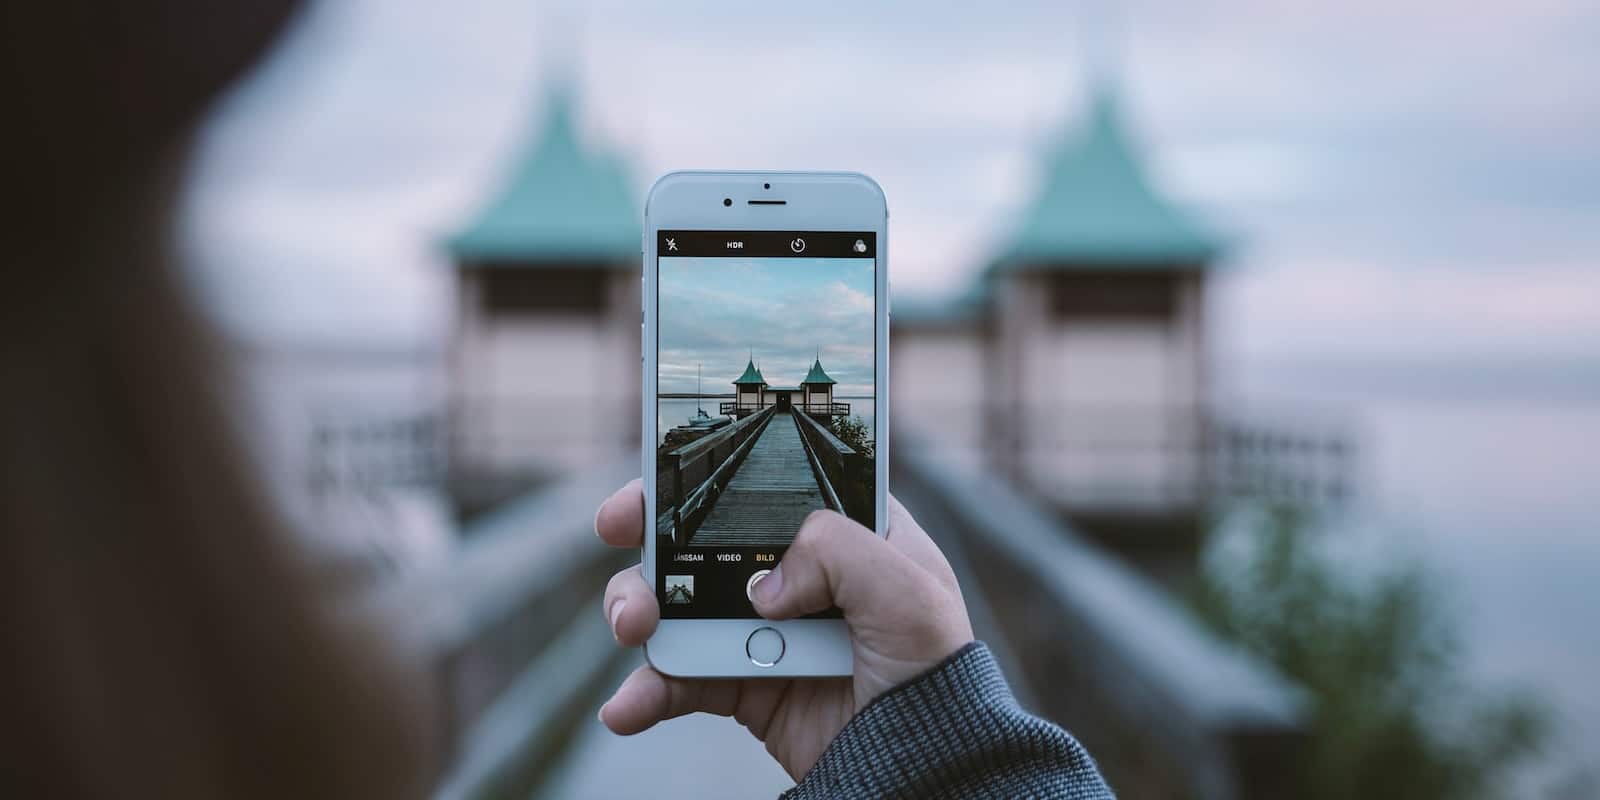 Learn the ins and outs of mobile photography with this massively discounted lesson bundle.